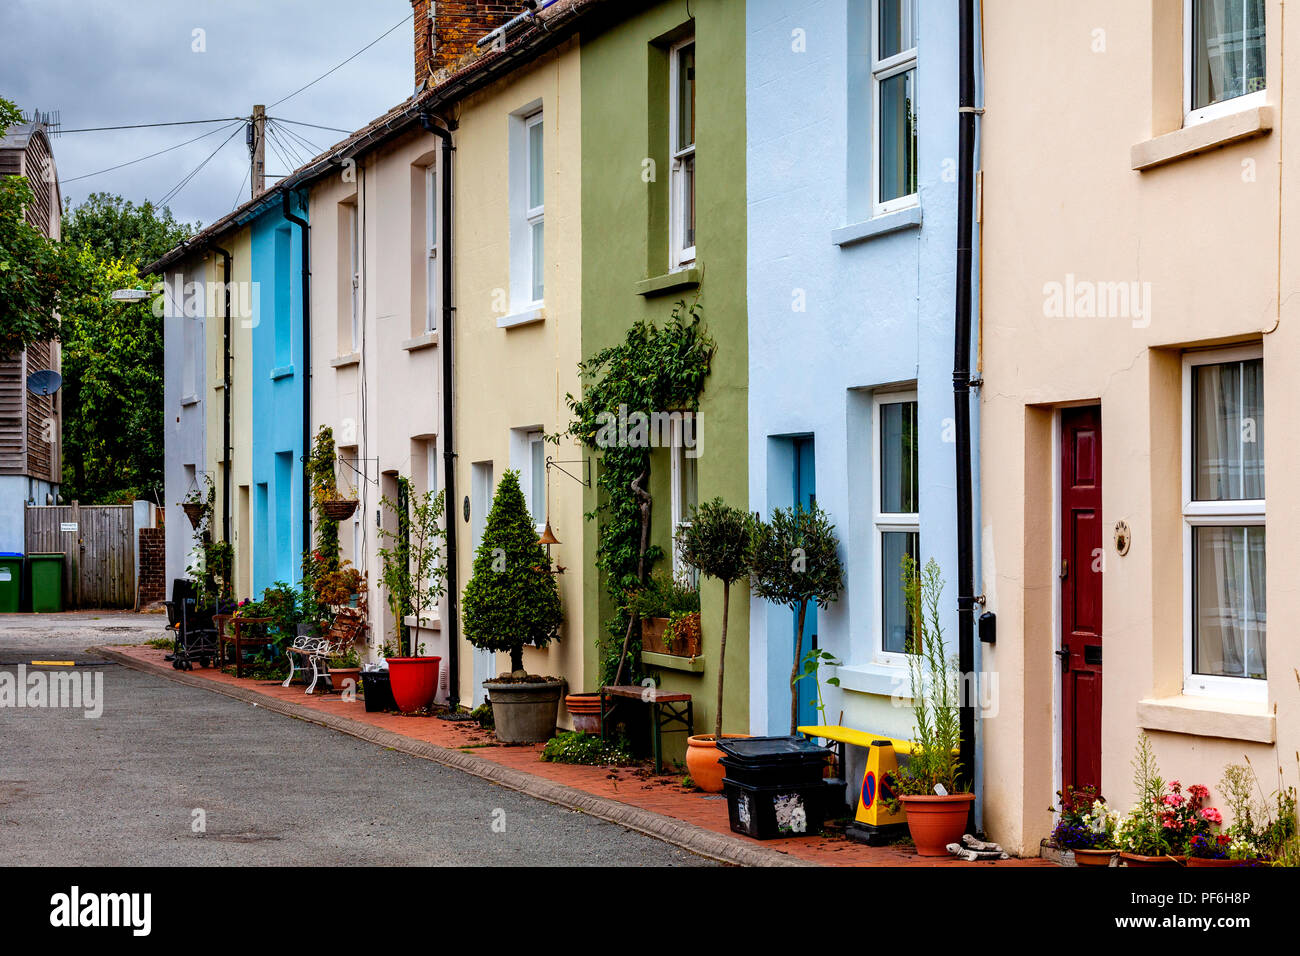 A Colourful Street In The County Town Of Lewes, East Sussex, UK Stock Photo